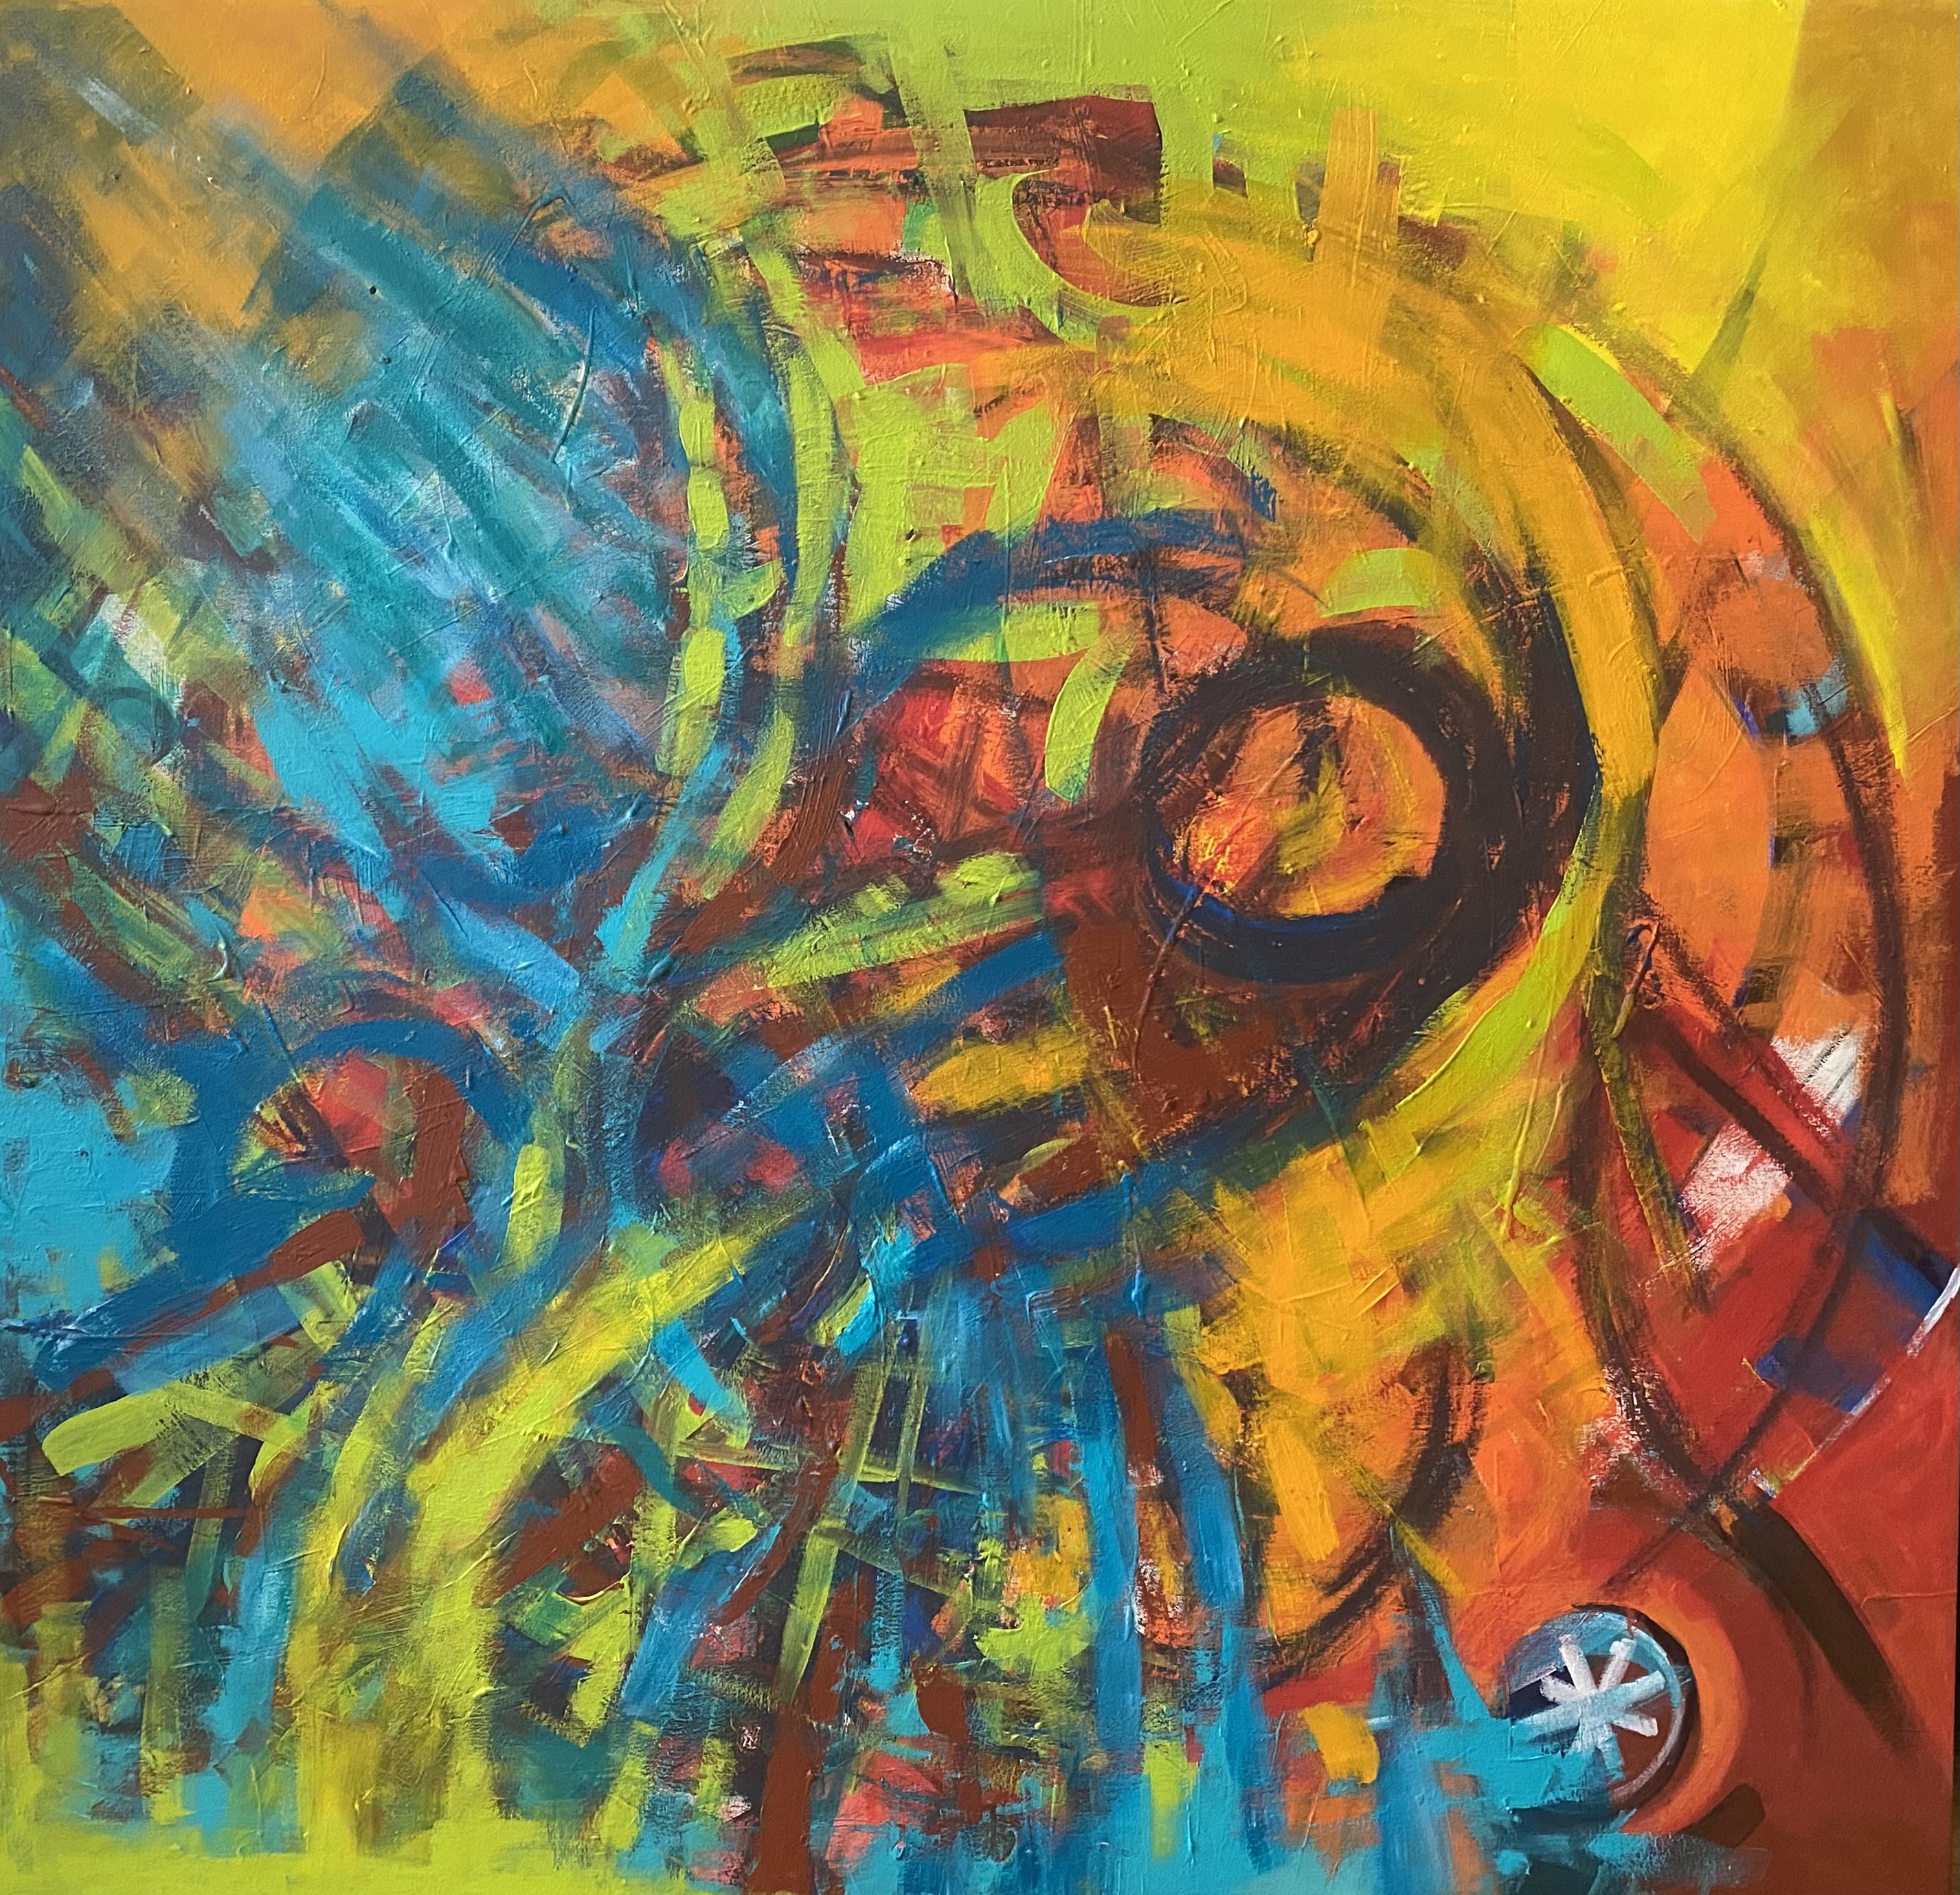 An abstract painting with blue and yellow swirls overlaid on red and orange.